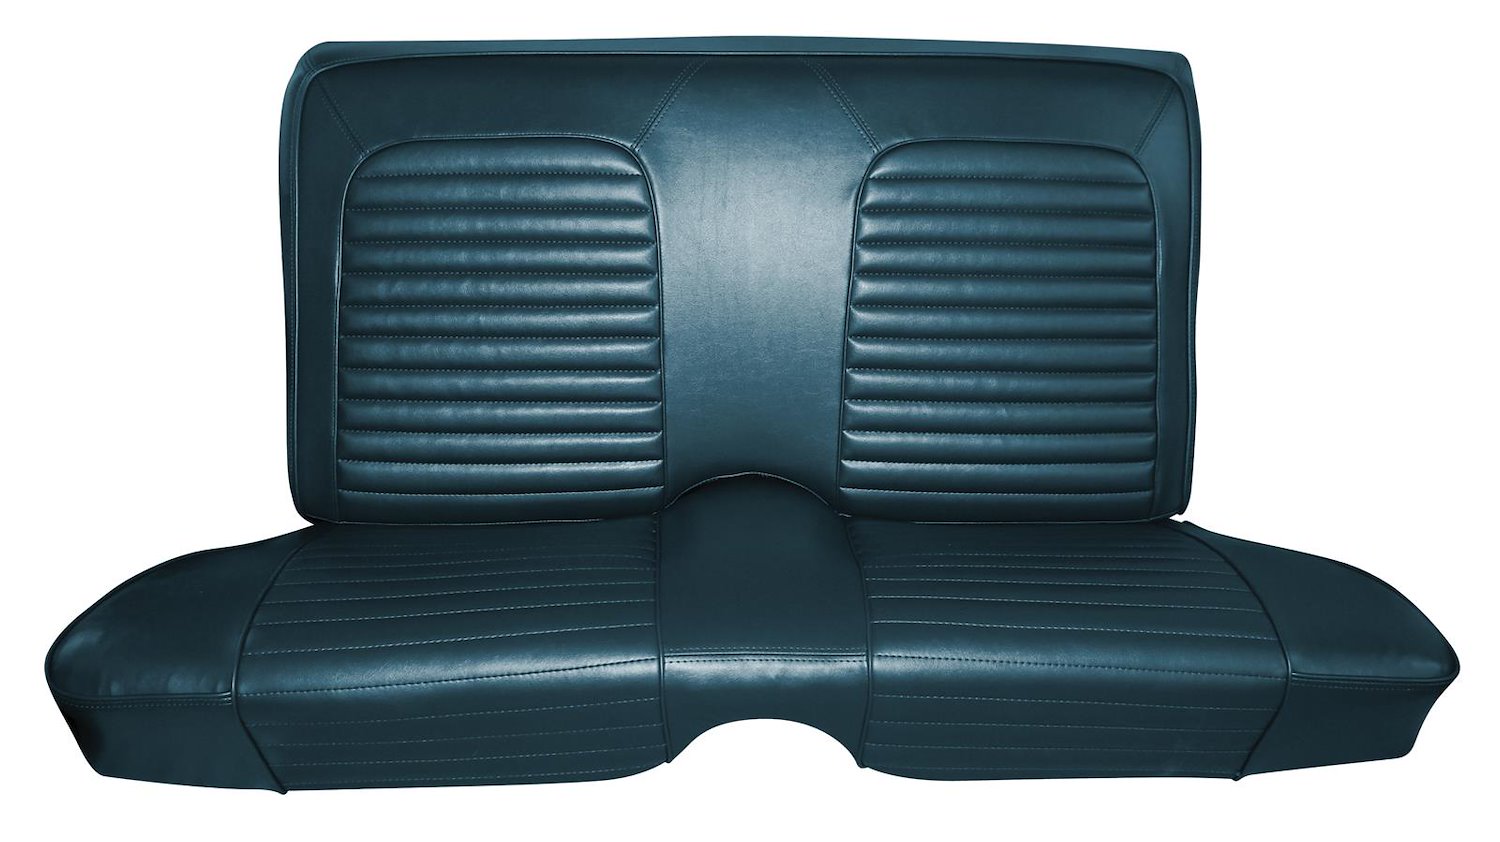 1968 Chevrolet Camaro Houndstooth Interior Optional Rear Fold Down Bench Seat Upholstery Set